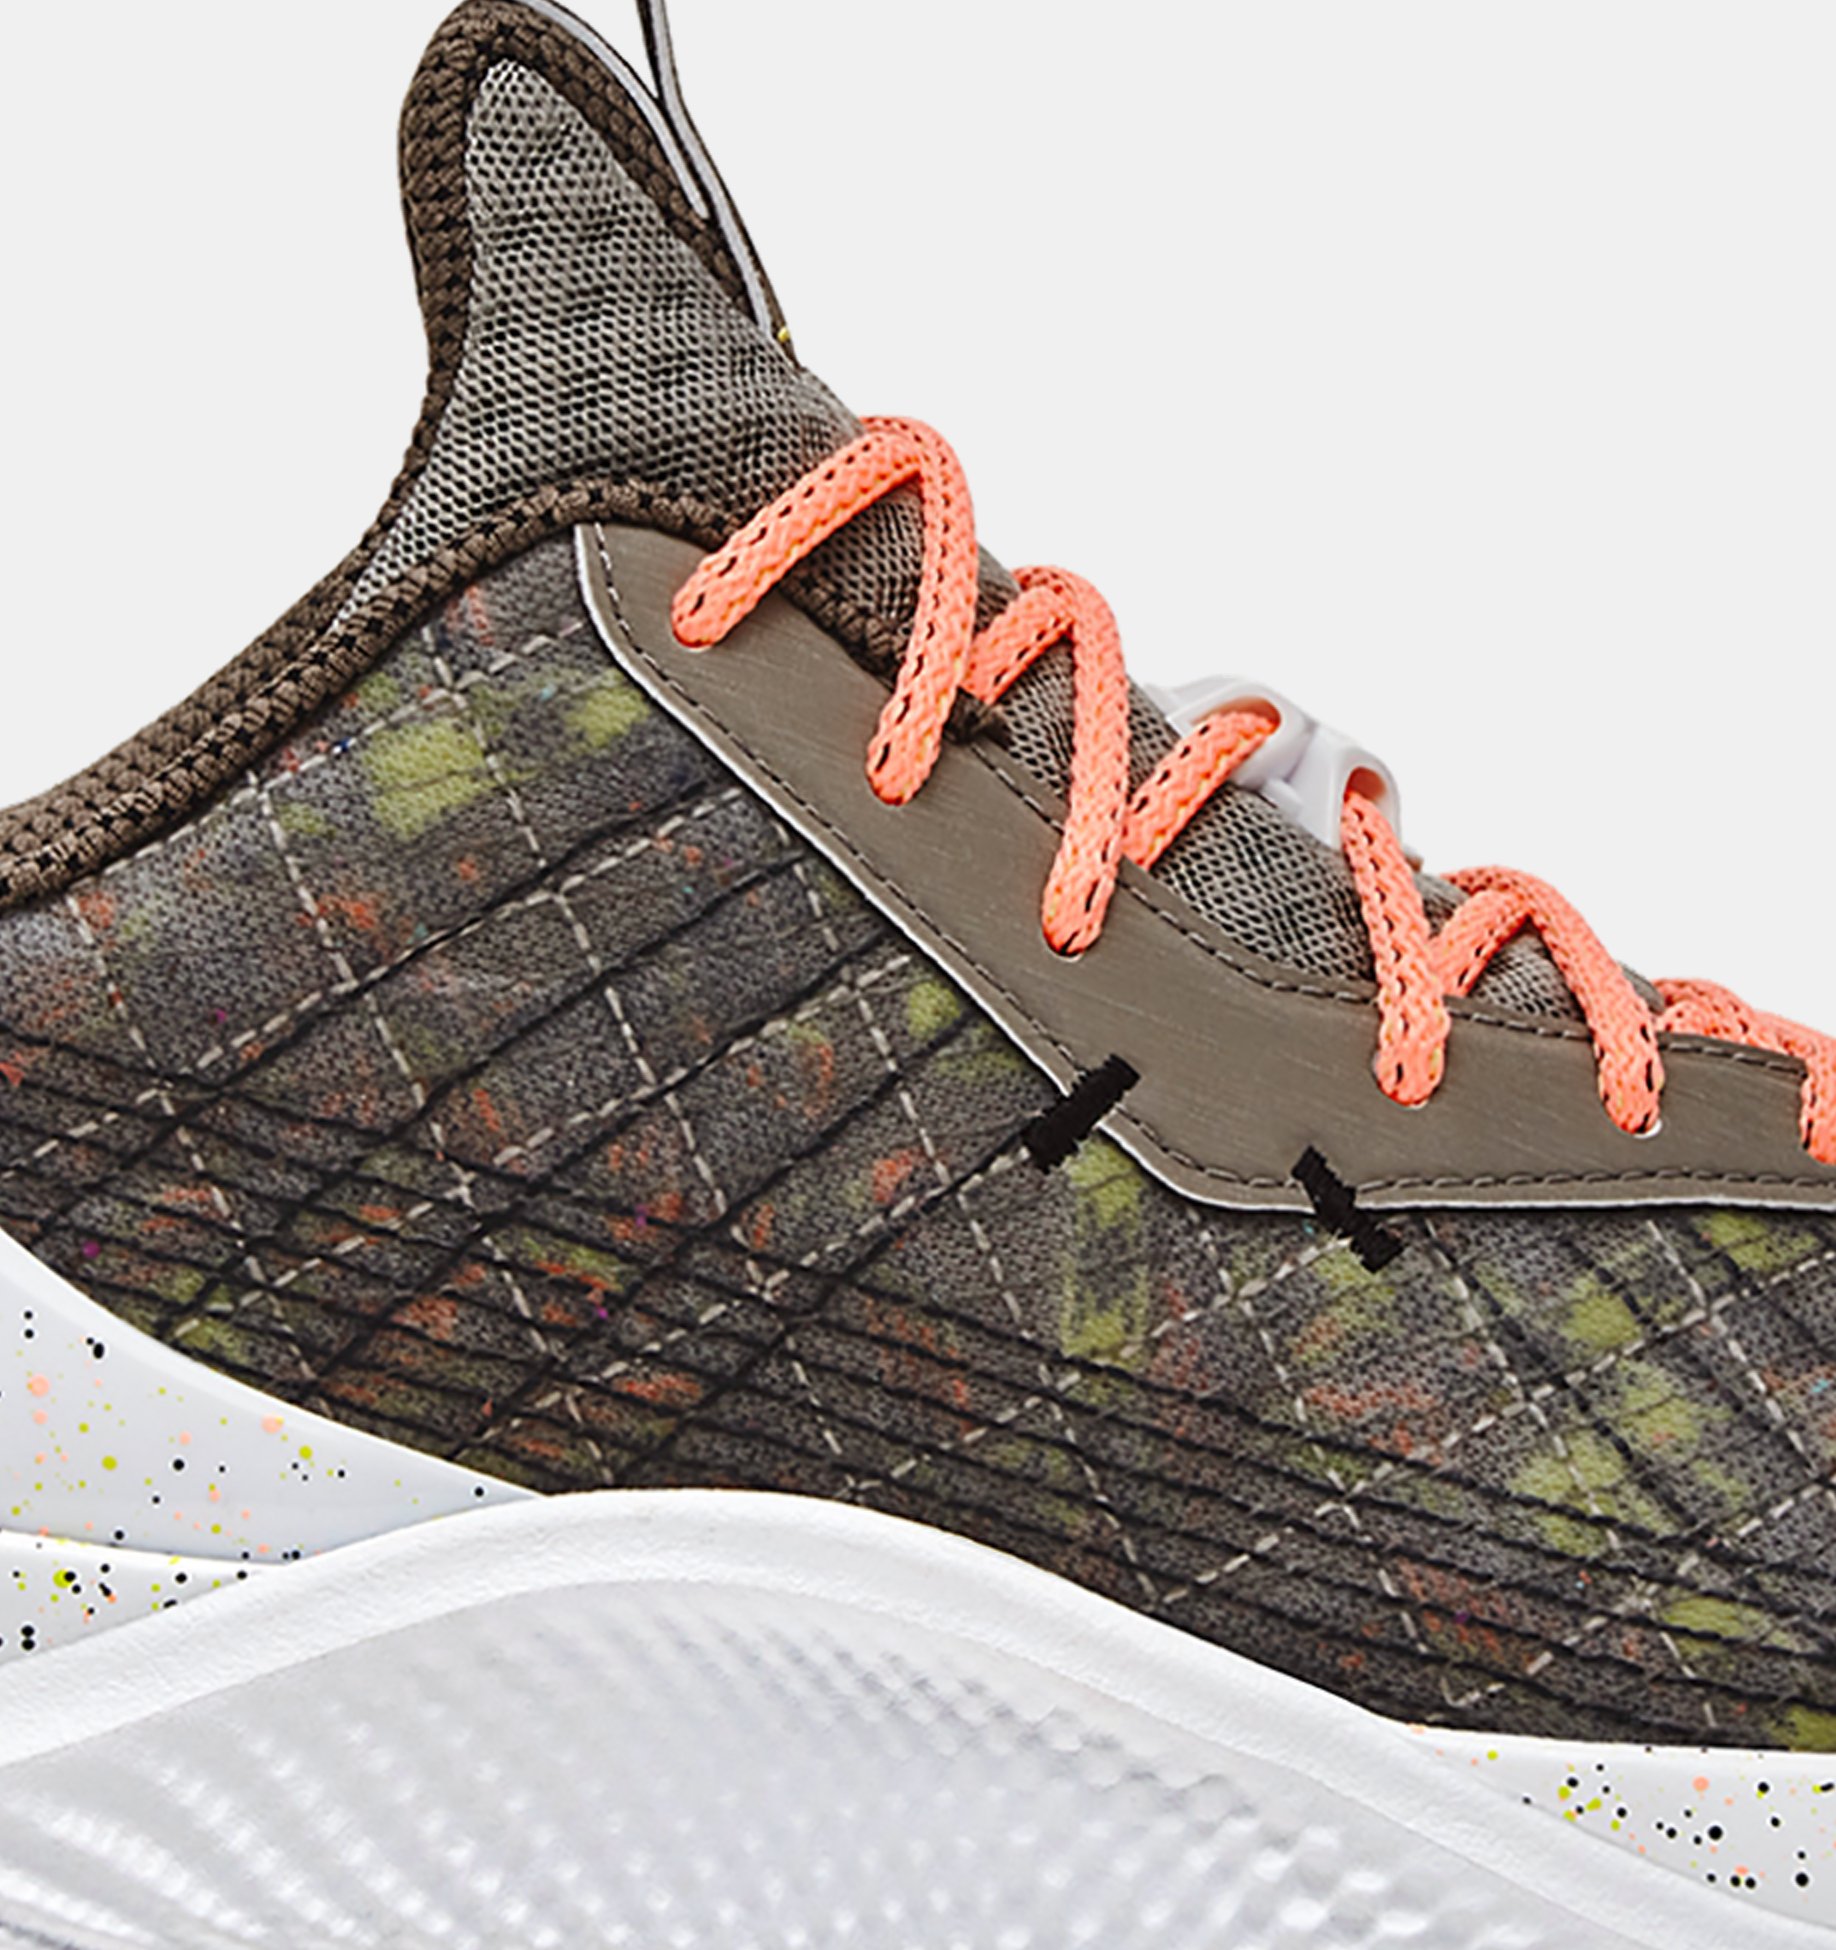 overzien Pas op Graag gedaan Unisex Curry Flow 10 'Treasure Island' Basketball Shoes | Under Armour TH